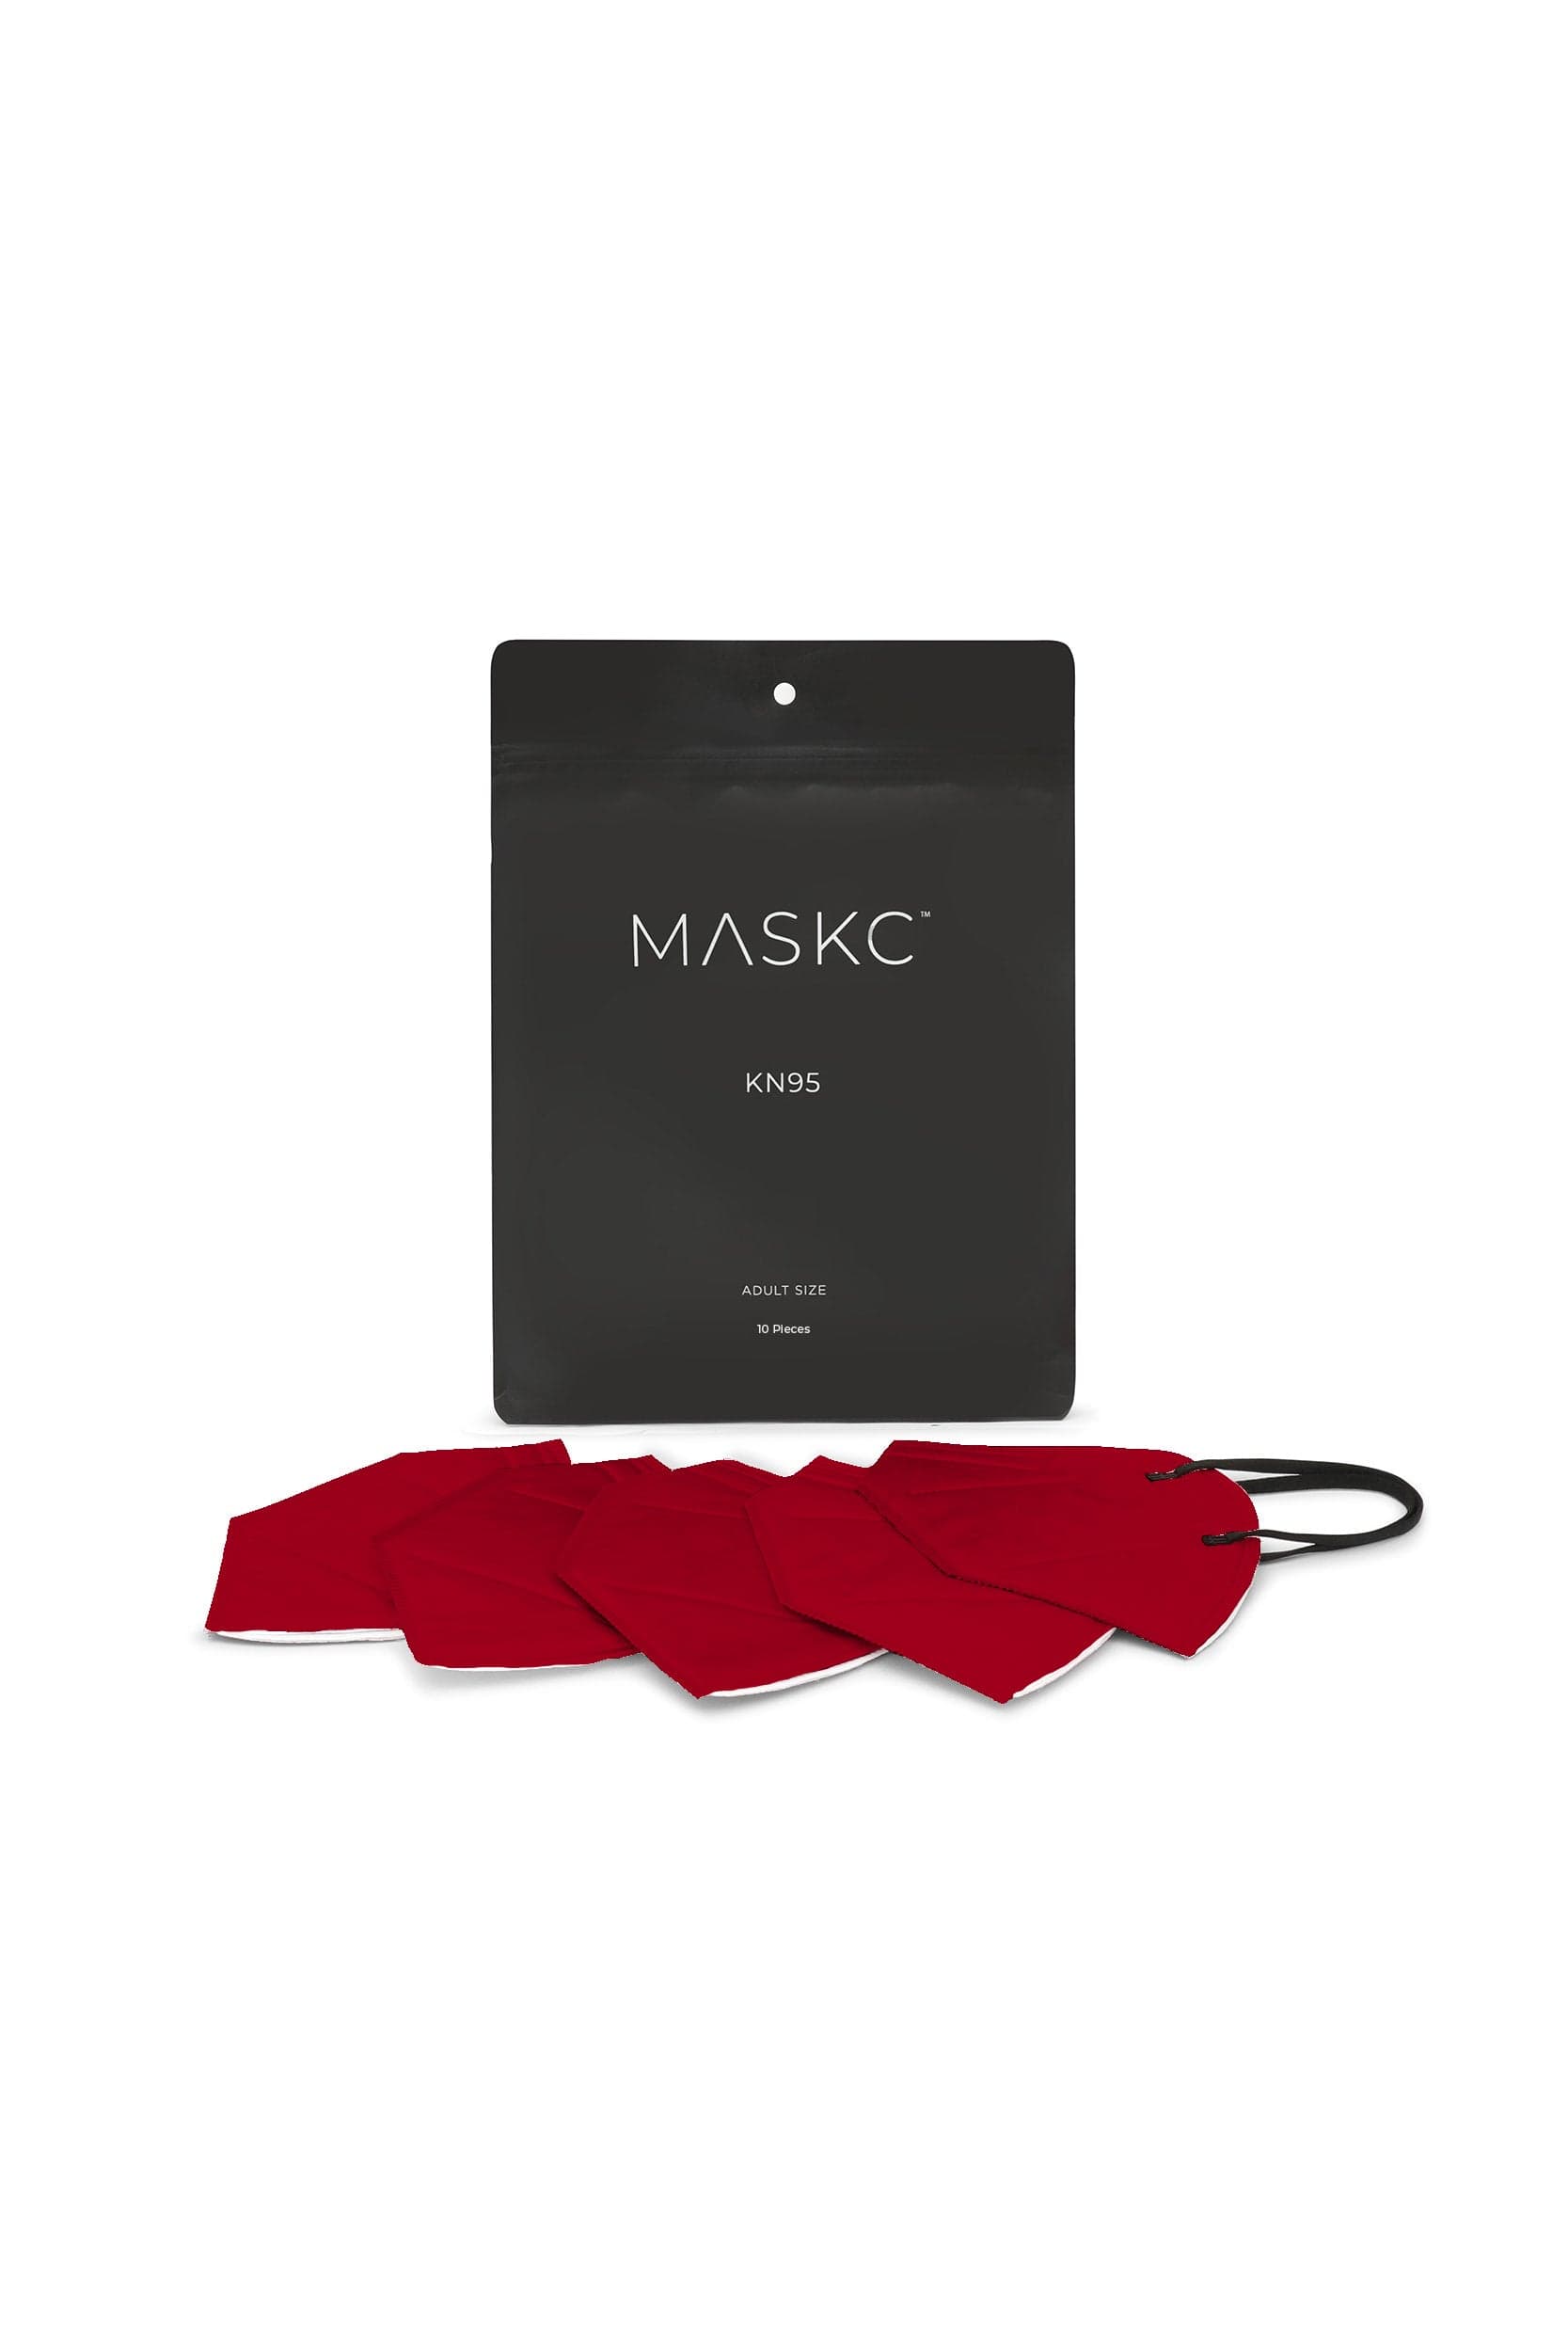 Pack of Bright Red KN95 face masks. Each pack contains stylish high quality face masks. 